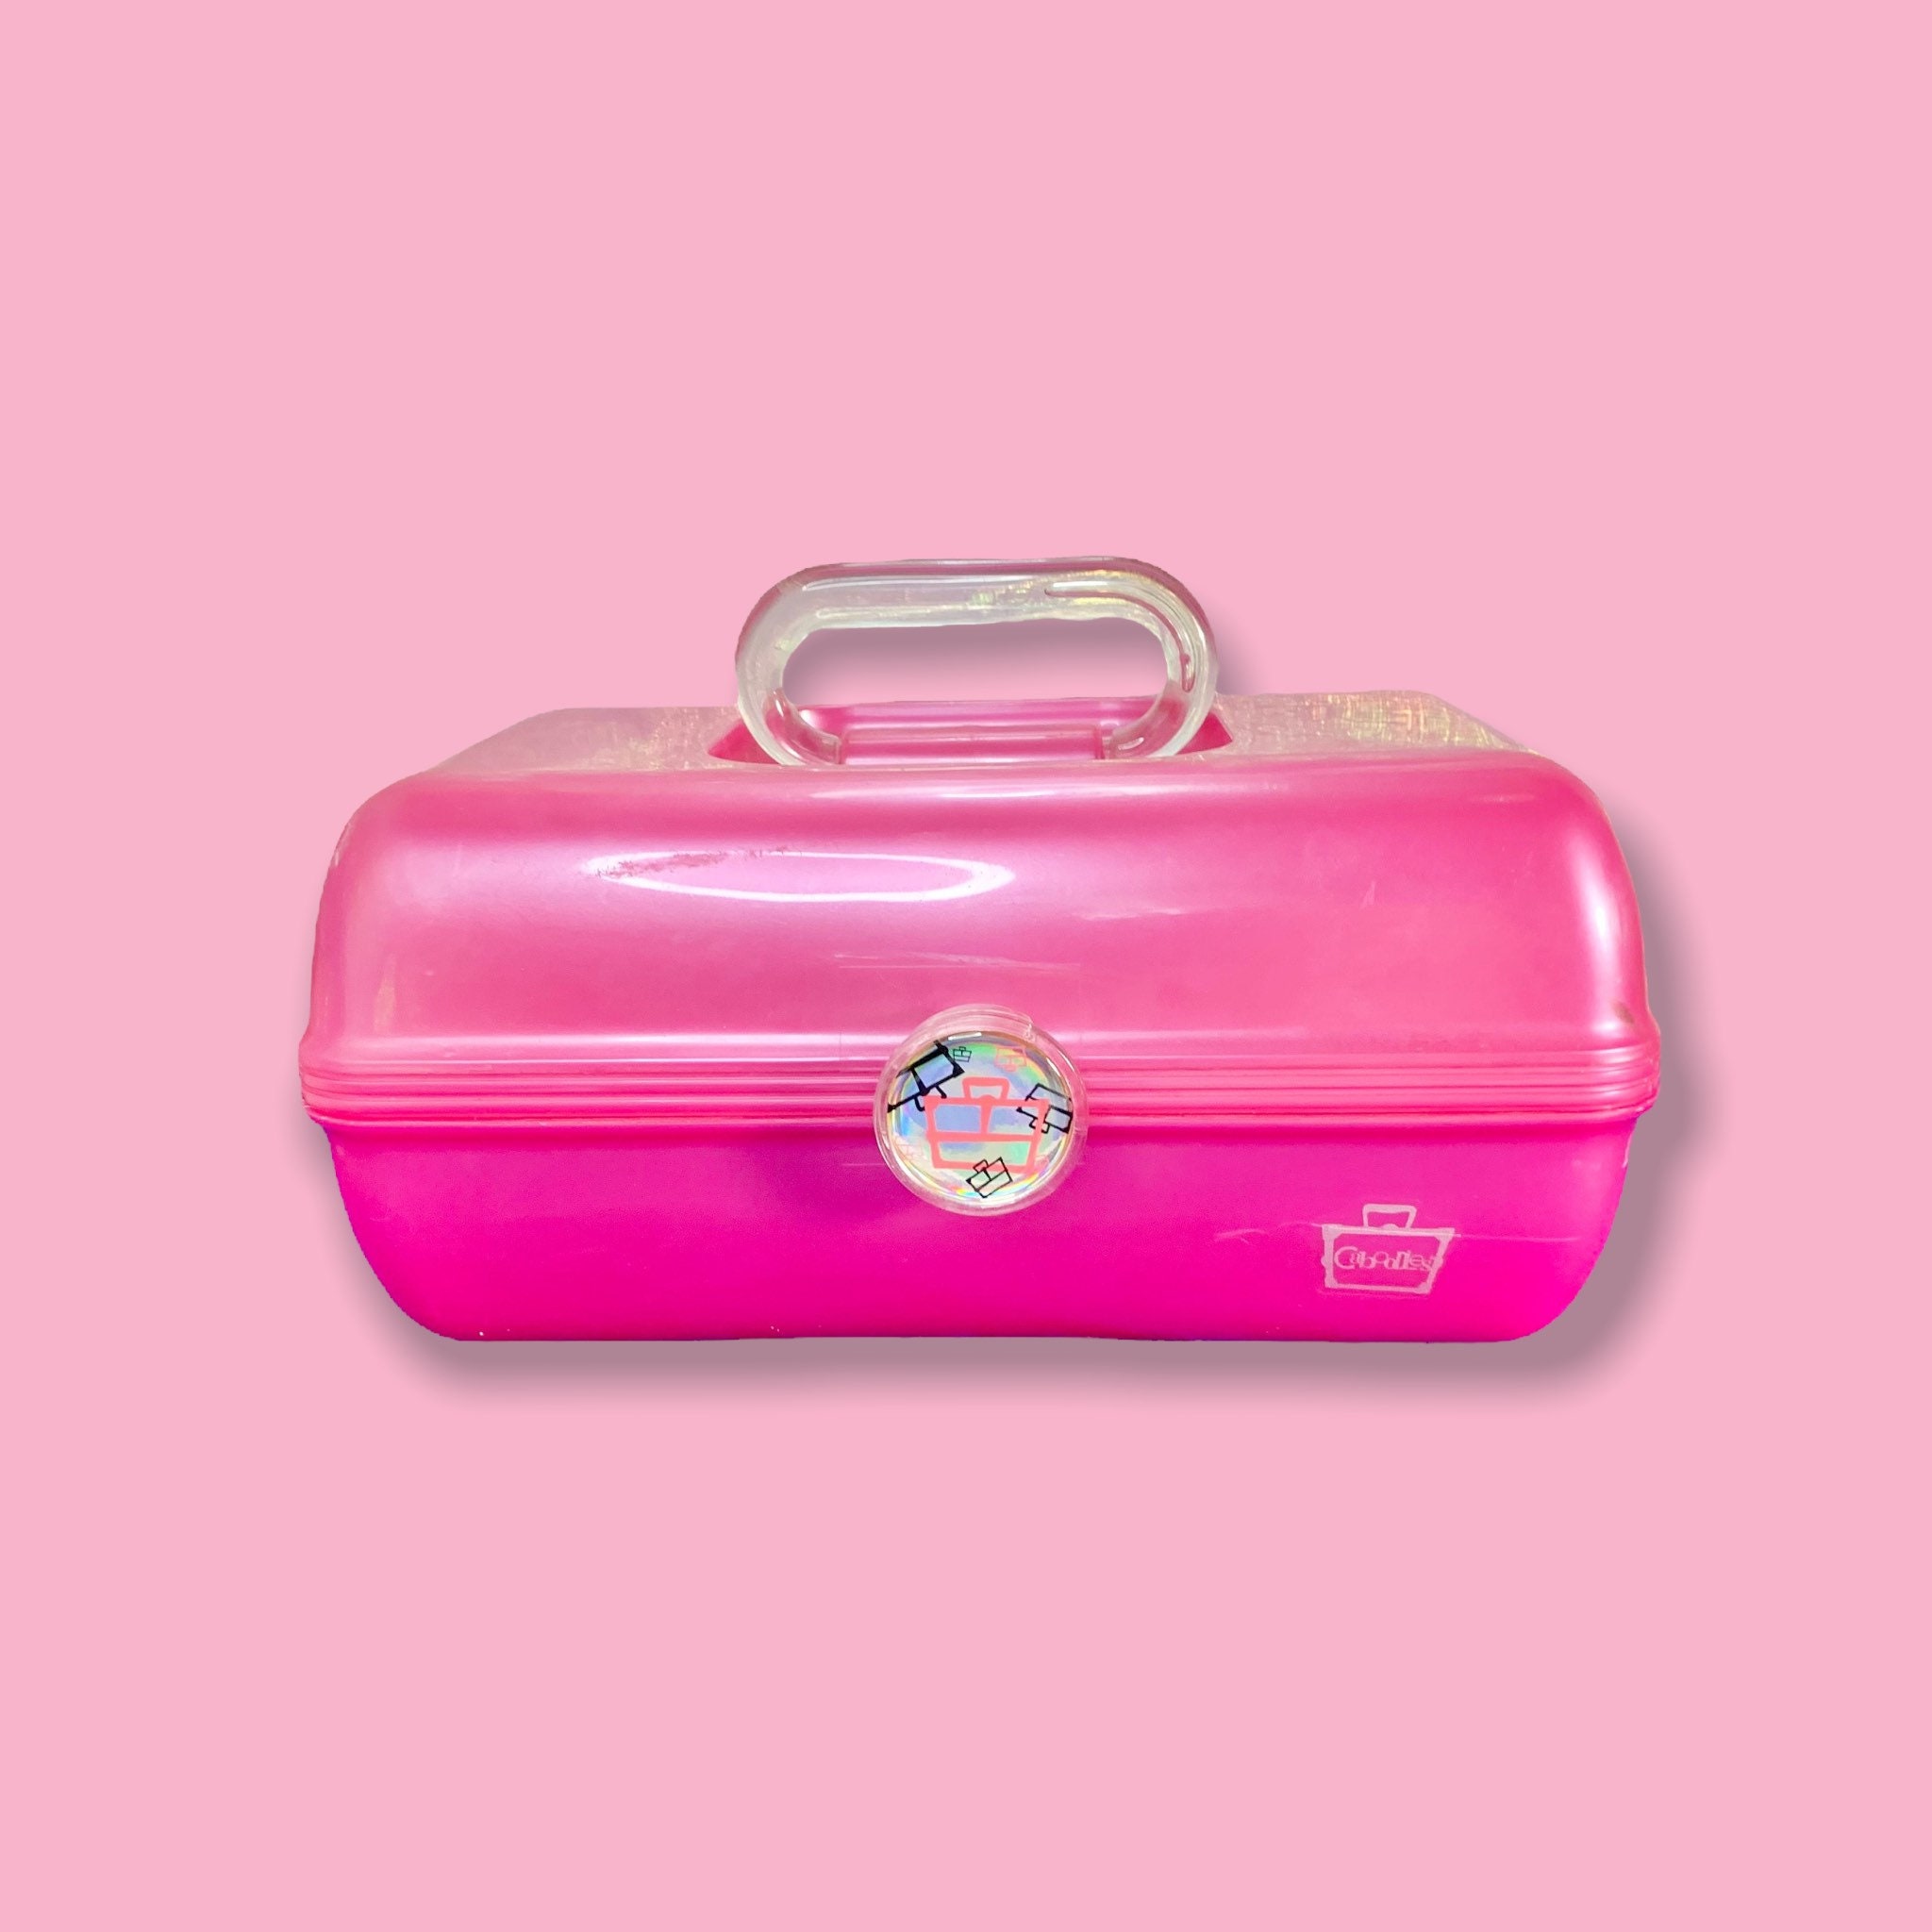 Caboodles 2010 Clear Acrylic Pink White Hearts Makeup Train Case